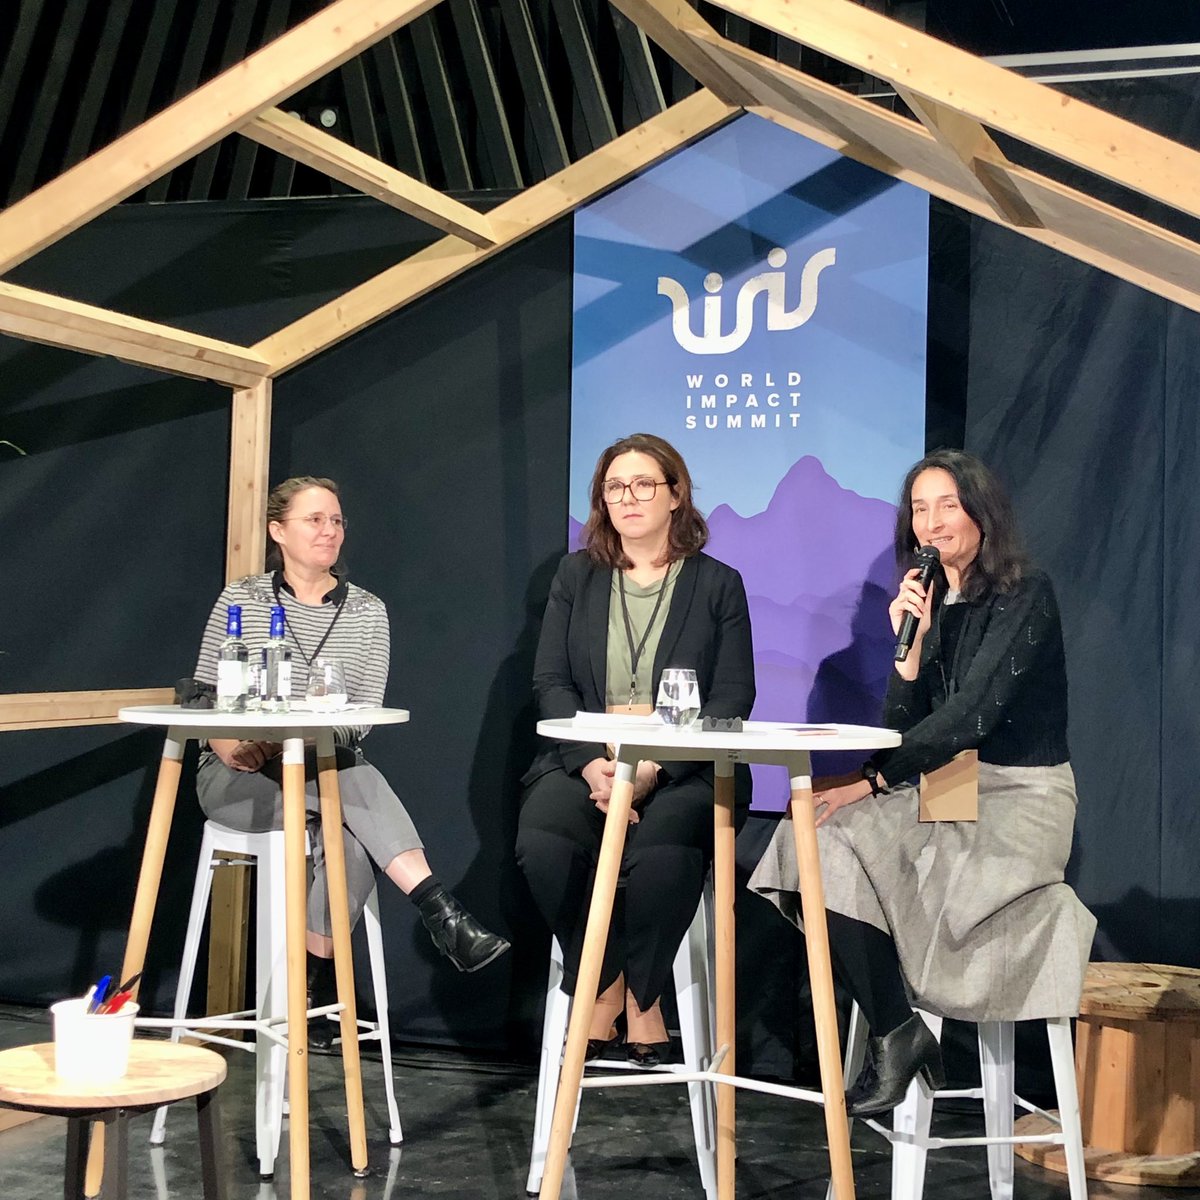 Inspiring workshop at #WIS2024 on #ResponsibleFinance: Strengthening climate resilience through financial inclusion and social #innovation. With Audrey Negui, Director of People Power Inclusion and Cécile Goubet, Director of Sustainable Finance Institute (IFD) @wisbdx